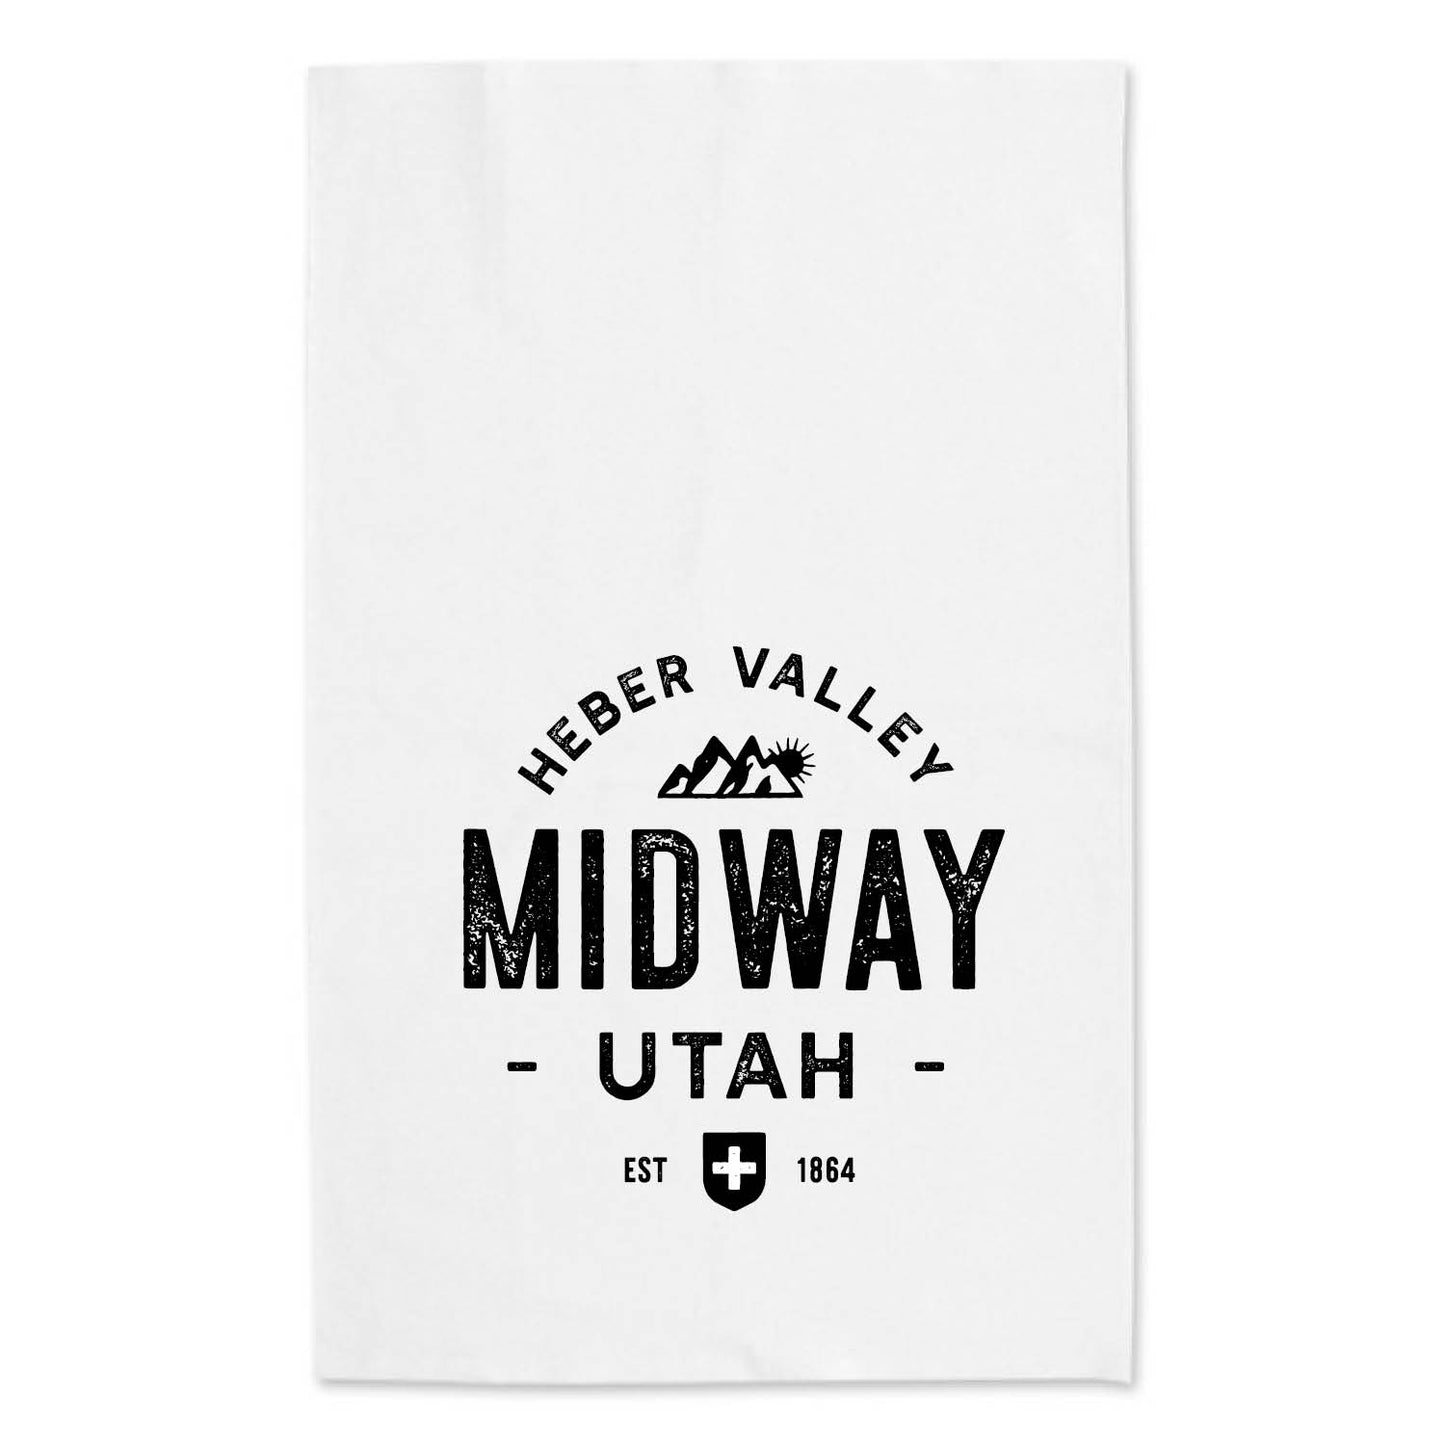 Heber Valley Midway Utah design printed on a white tea towel showing mountains and a Swiss flag